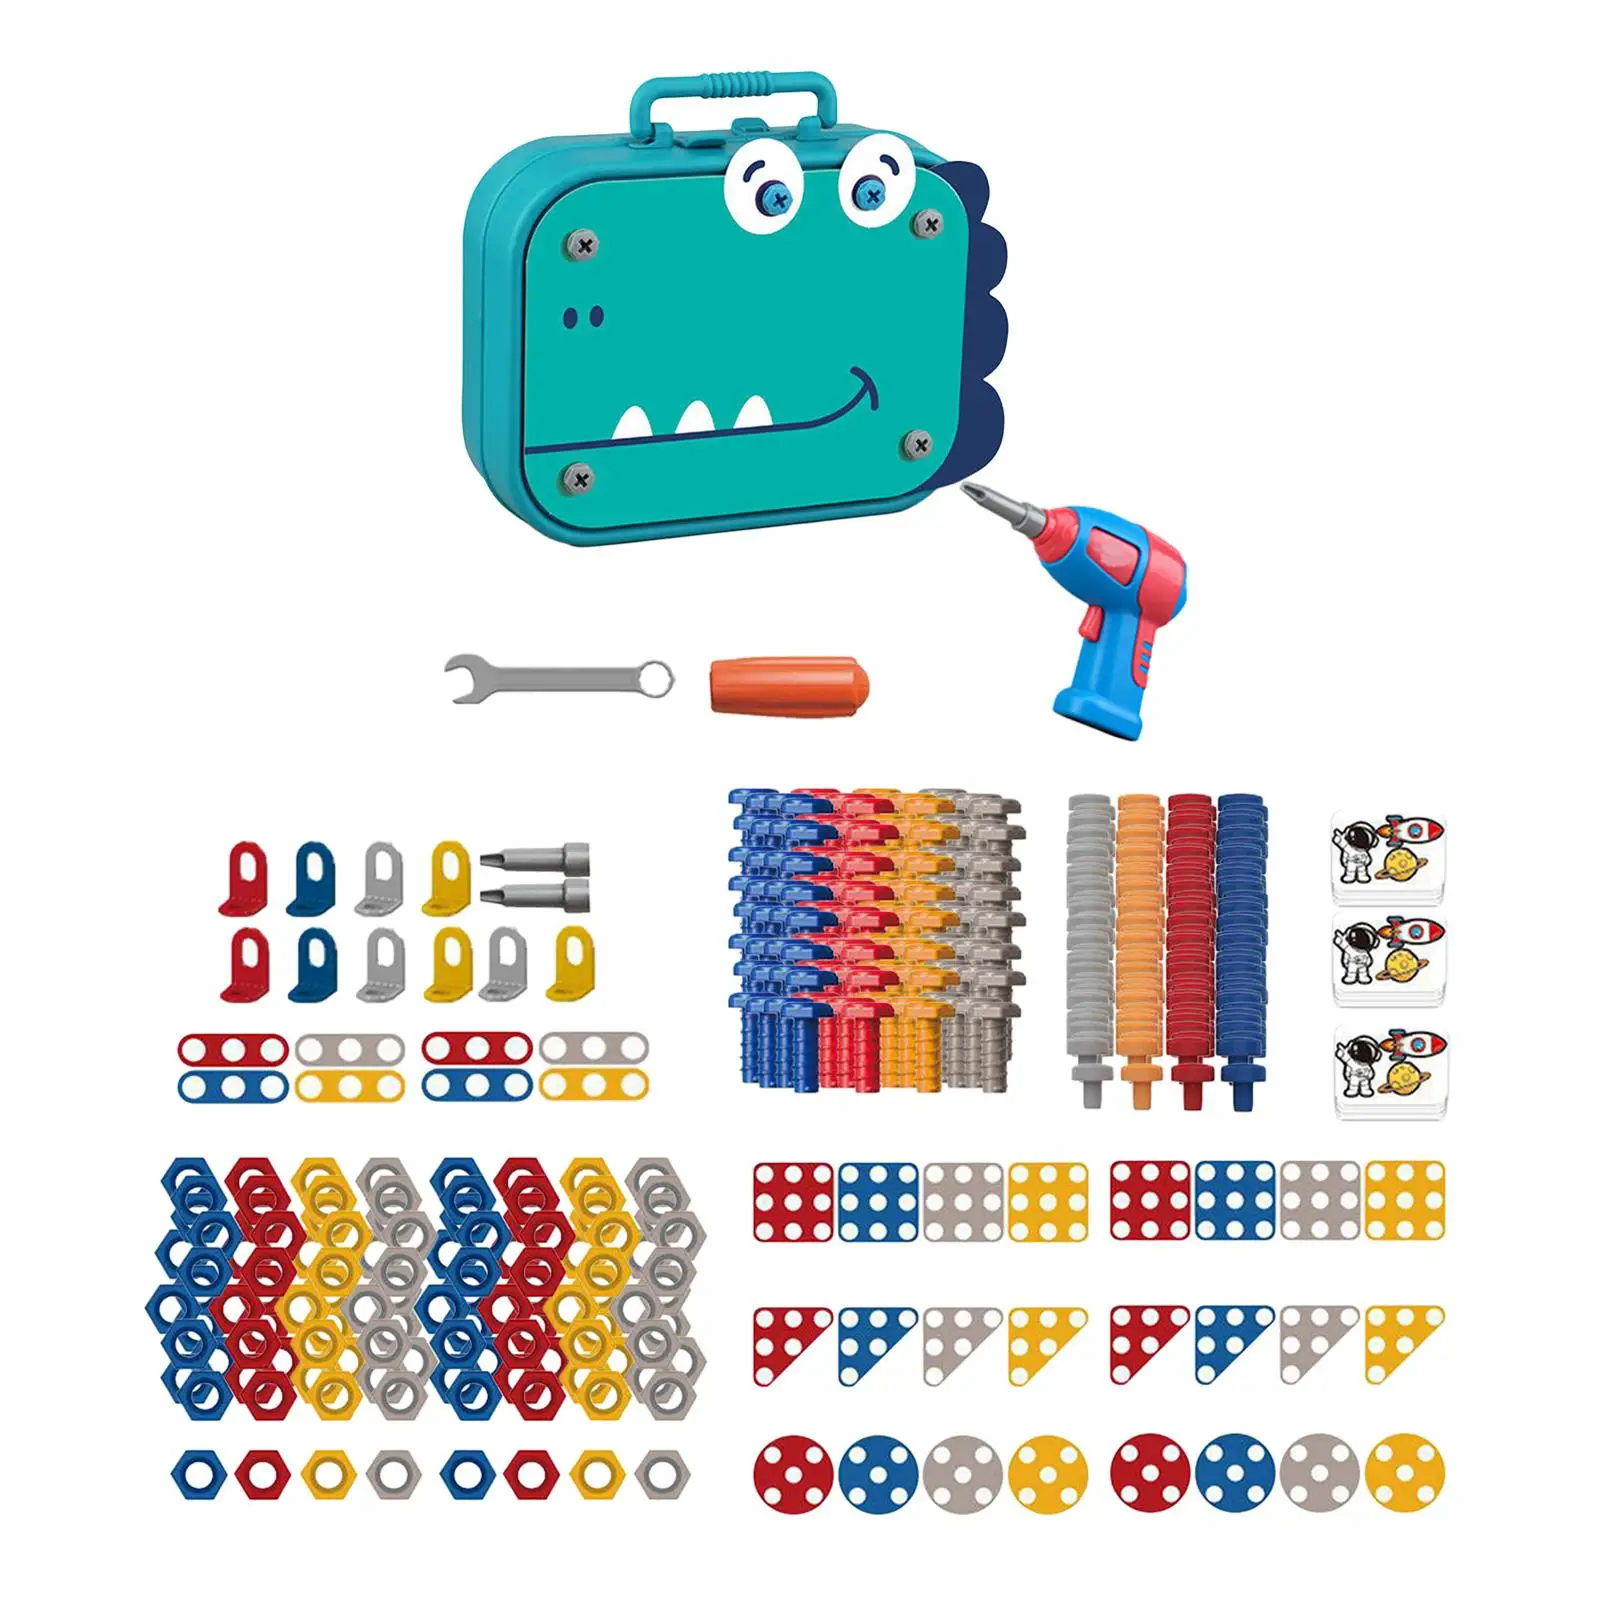 Drill and Screwdriver Toy Set DIY Developmental Educational Stem Learning Toys Preschool Patience Birthday Gift Problem Solving